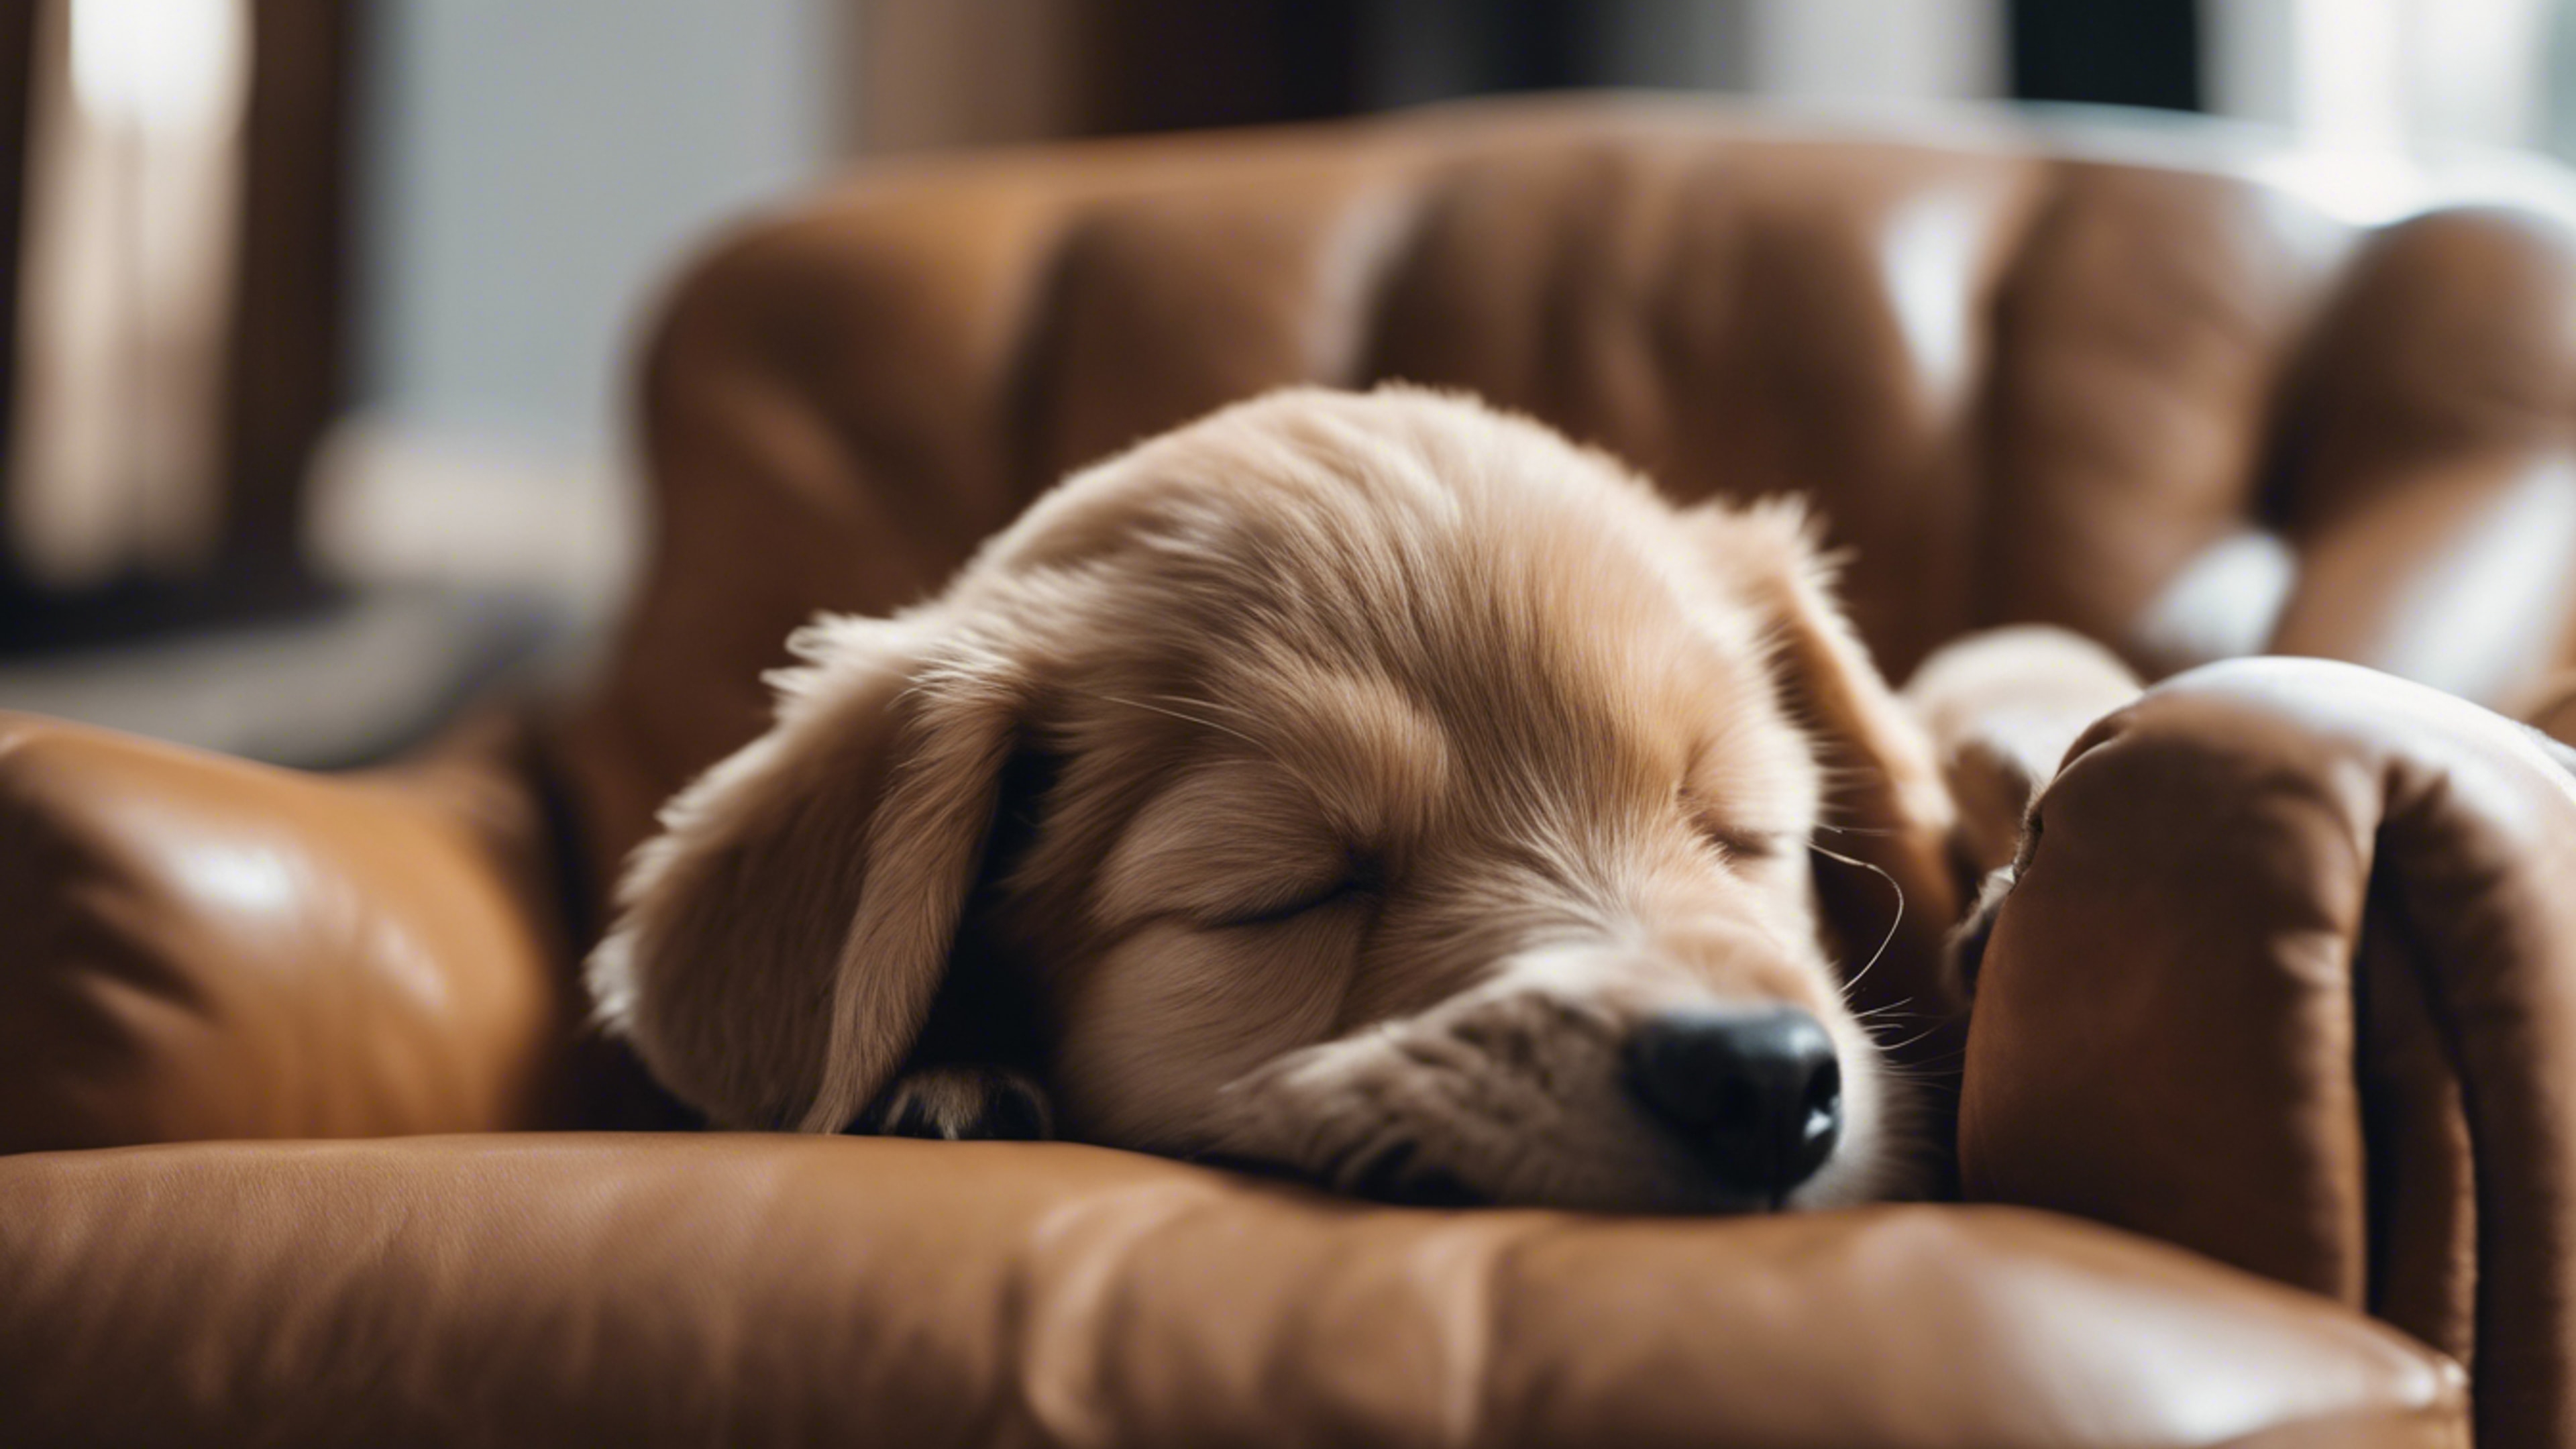 A cute puppy snoozing on a comfortable, oversized brown leather armchair. วอลล์เปเปอร์[9200ee1466b7462a9782]